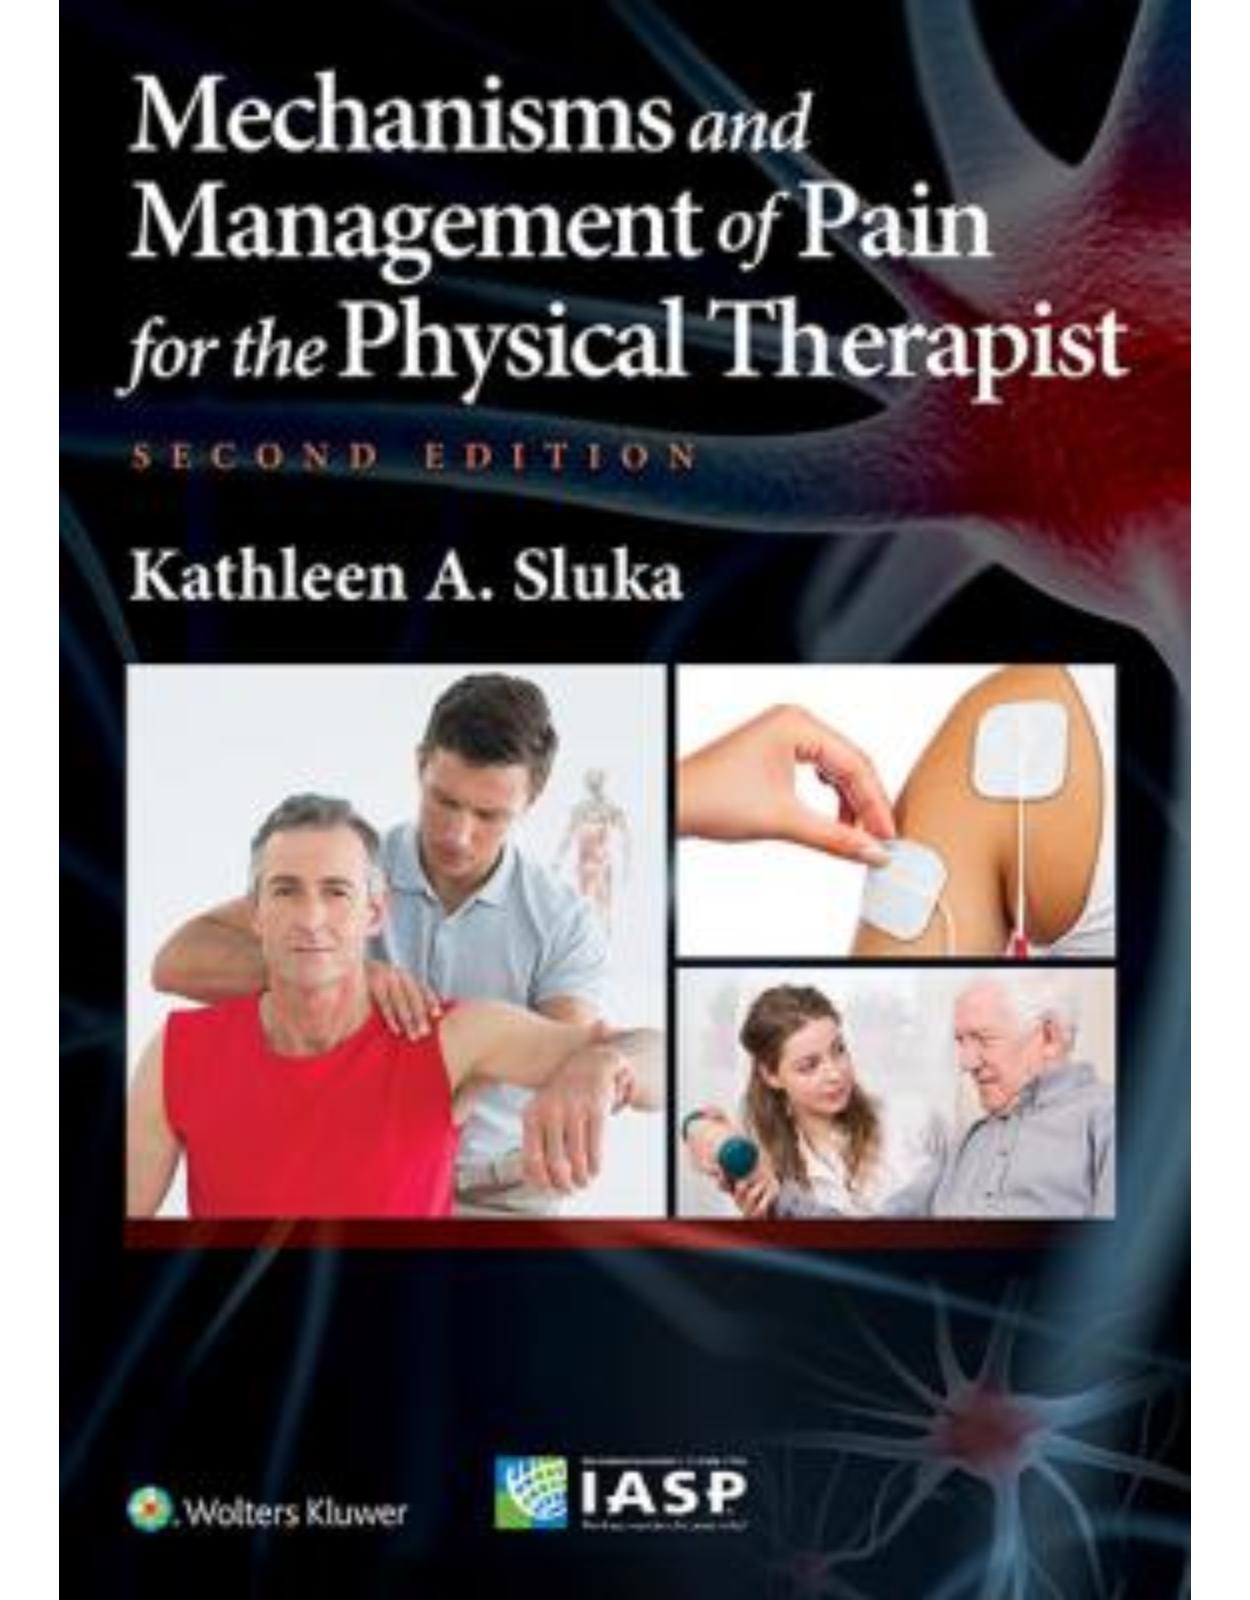 Mechanisms and Management of Pain for the Physical Therapist, 2e